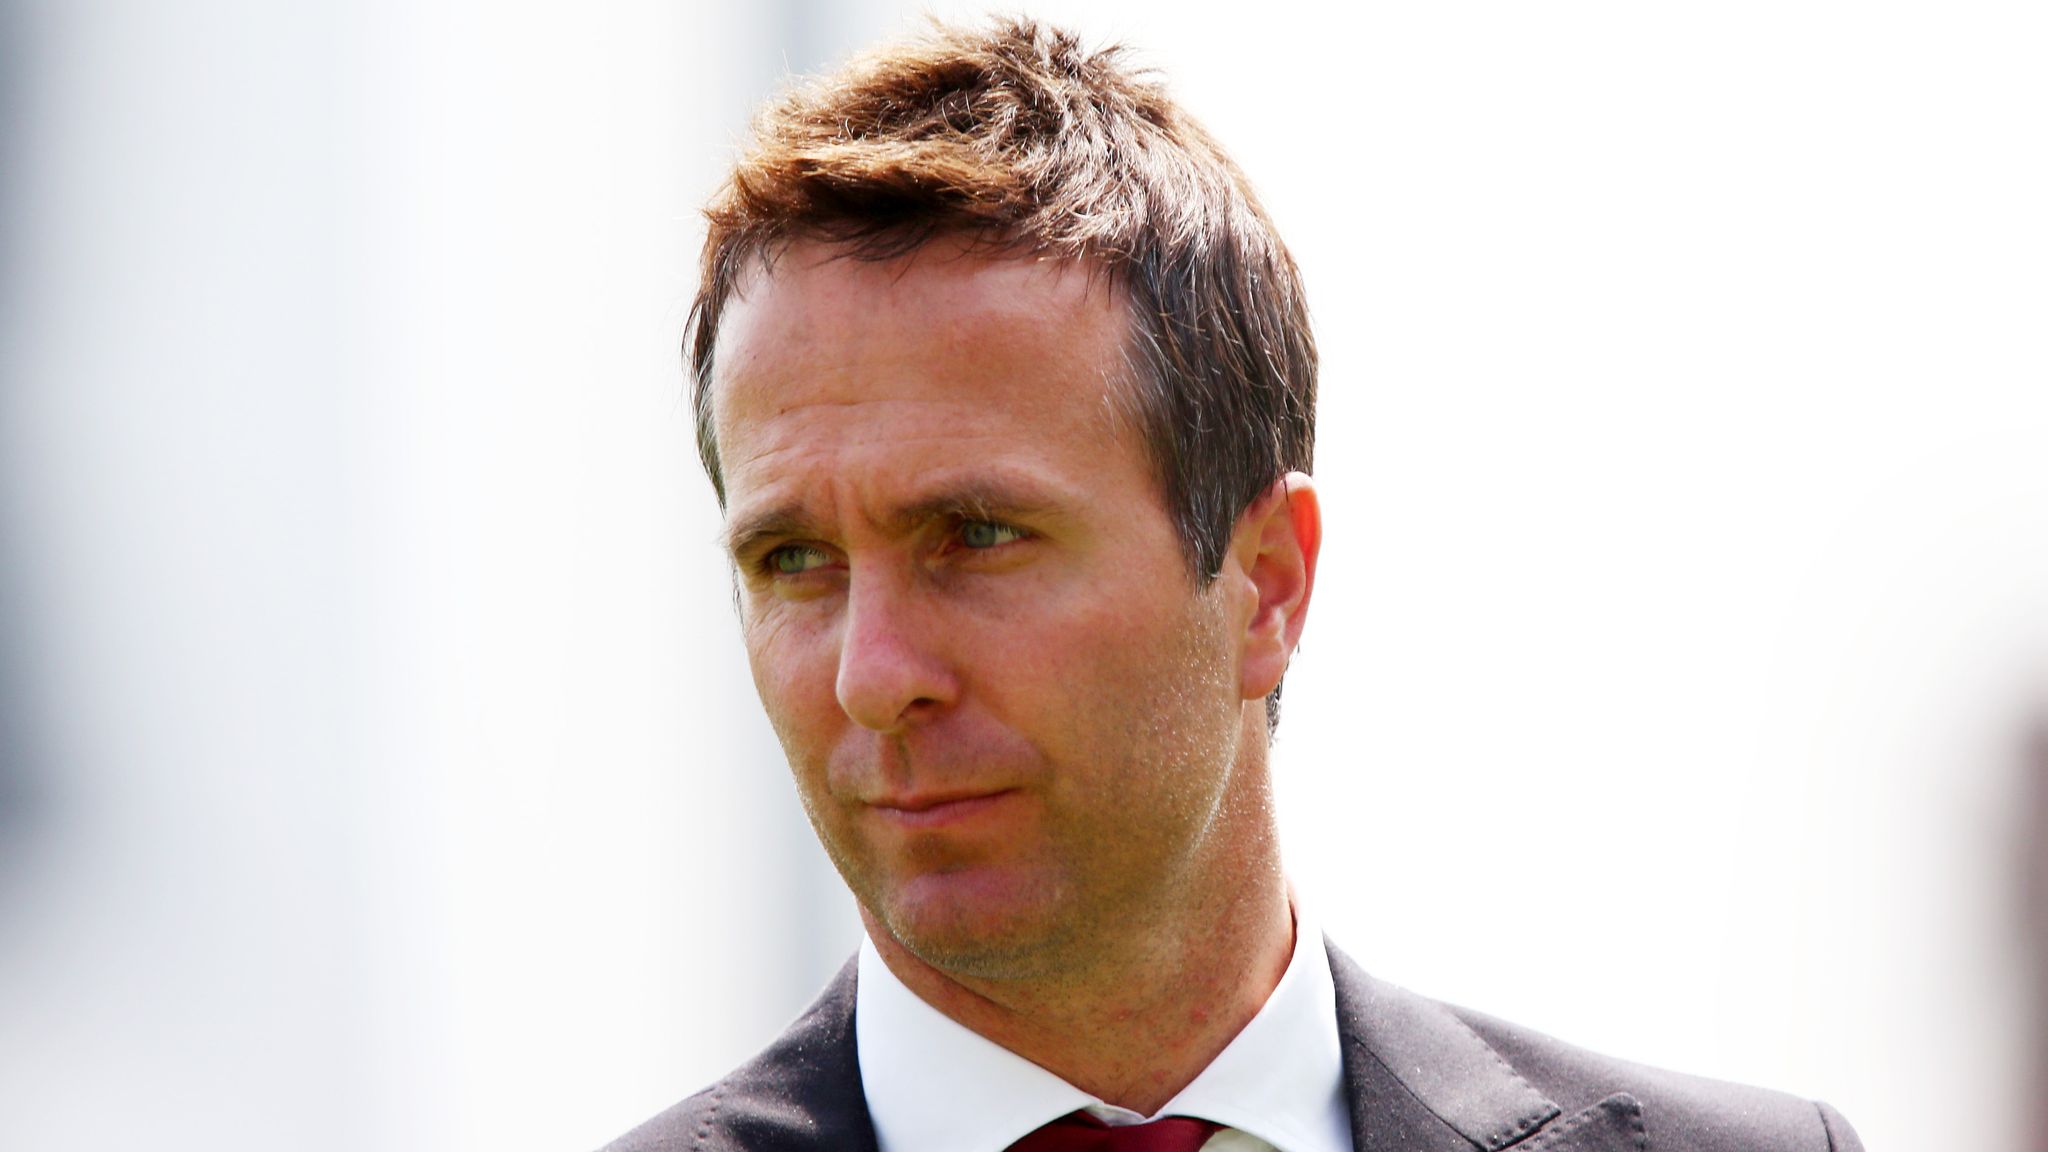 Michael Vaughan Critiques England's Selection Policy: A Fine Line Between Support and Complacency